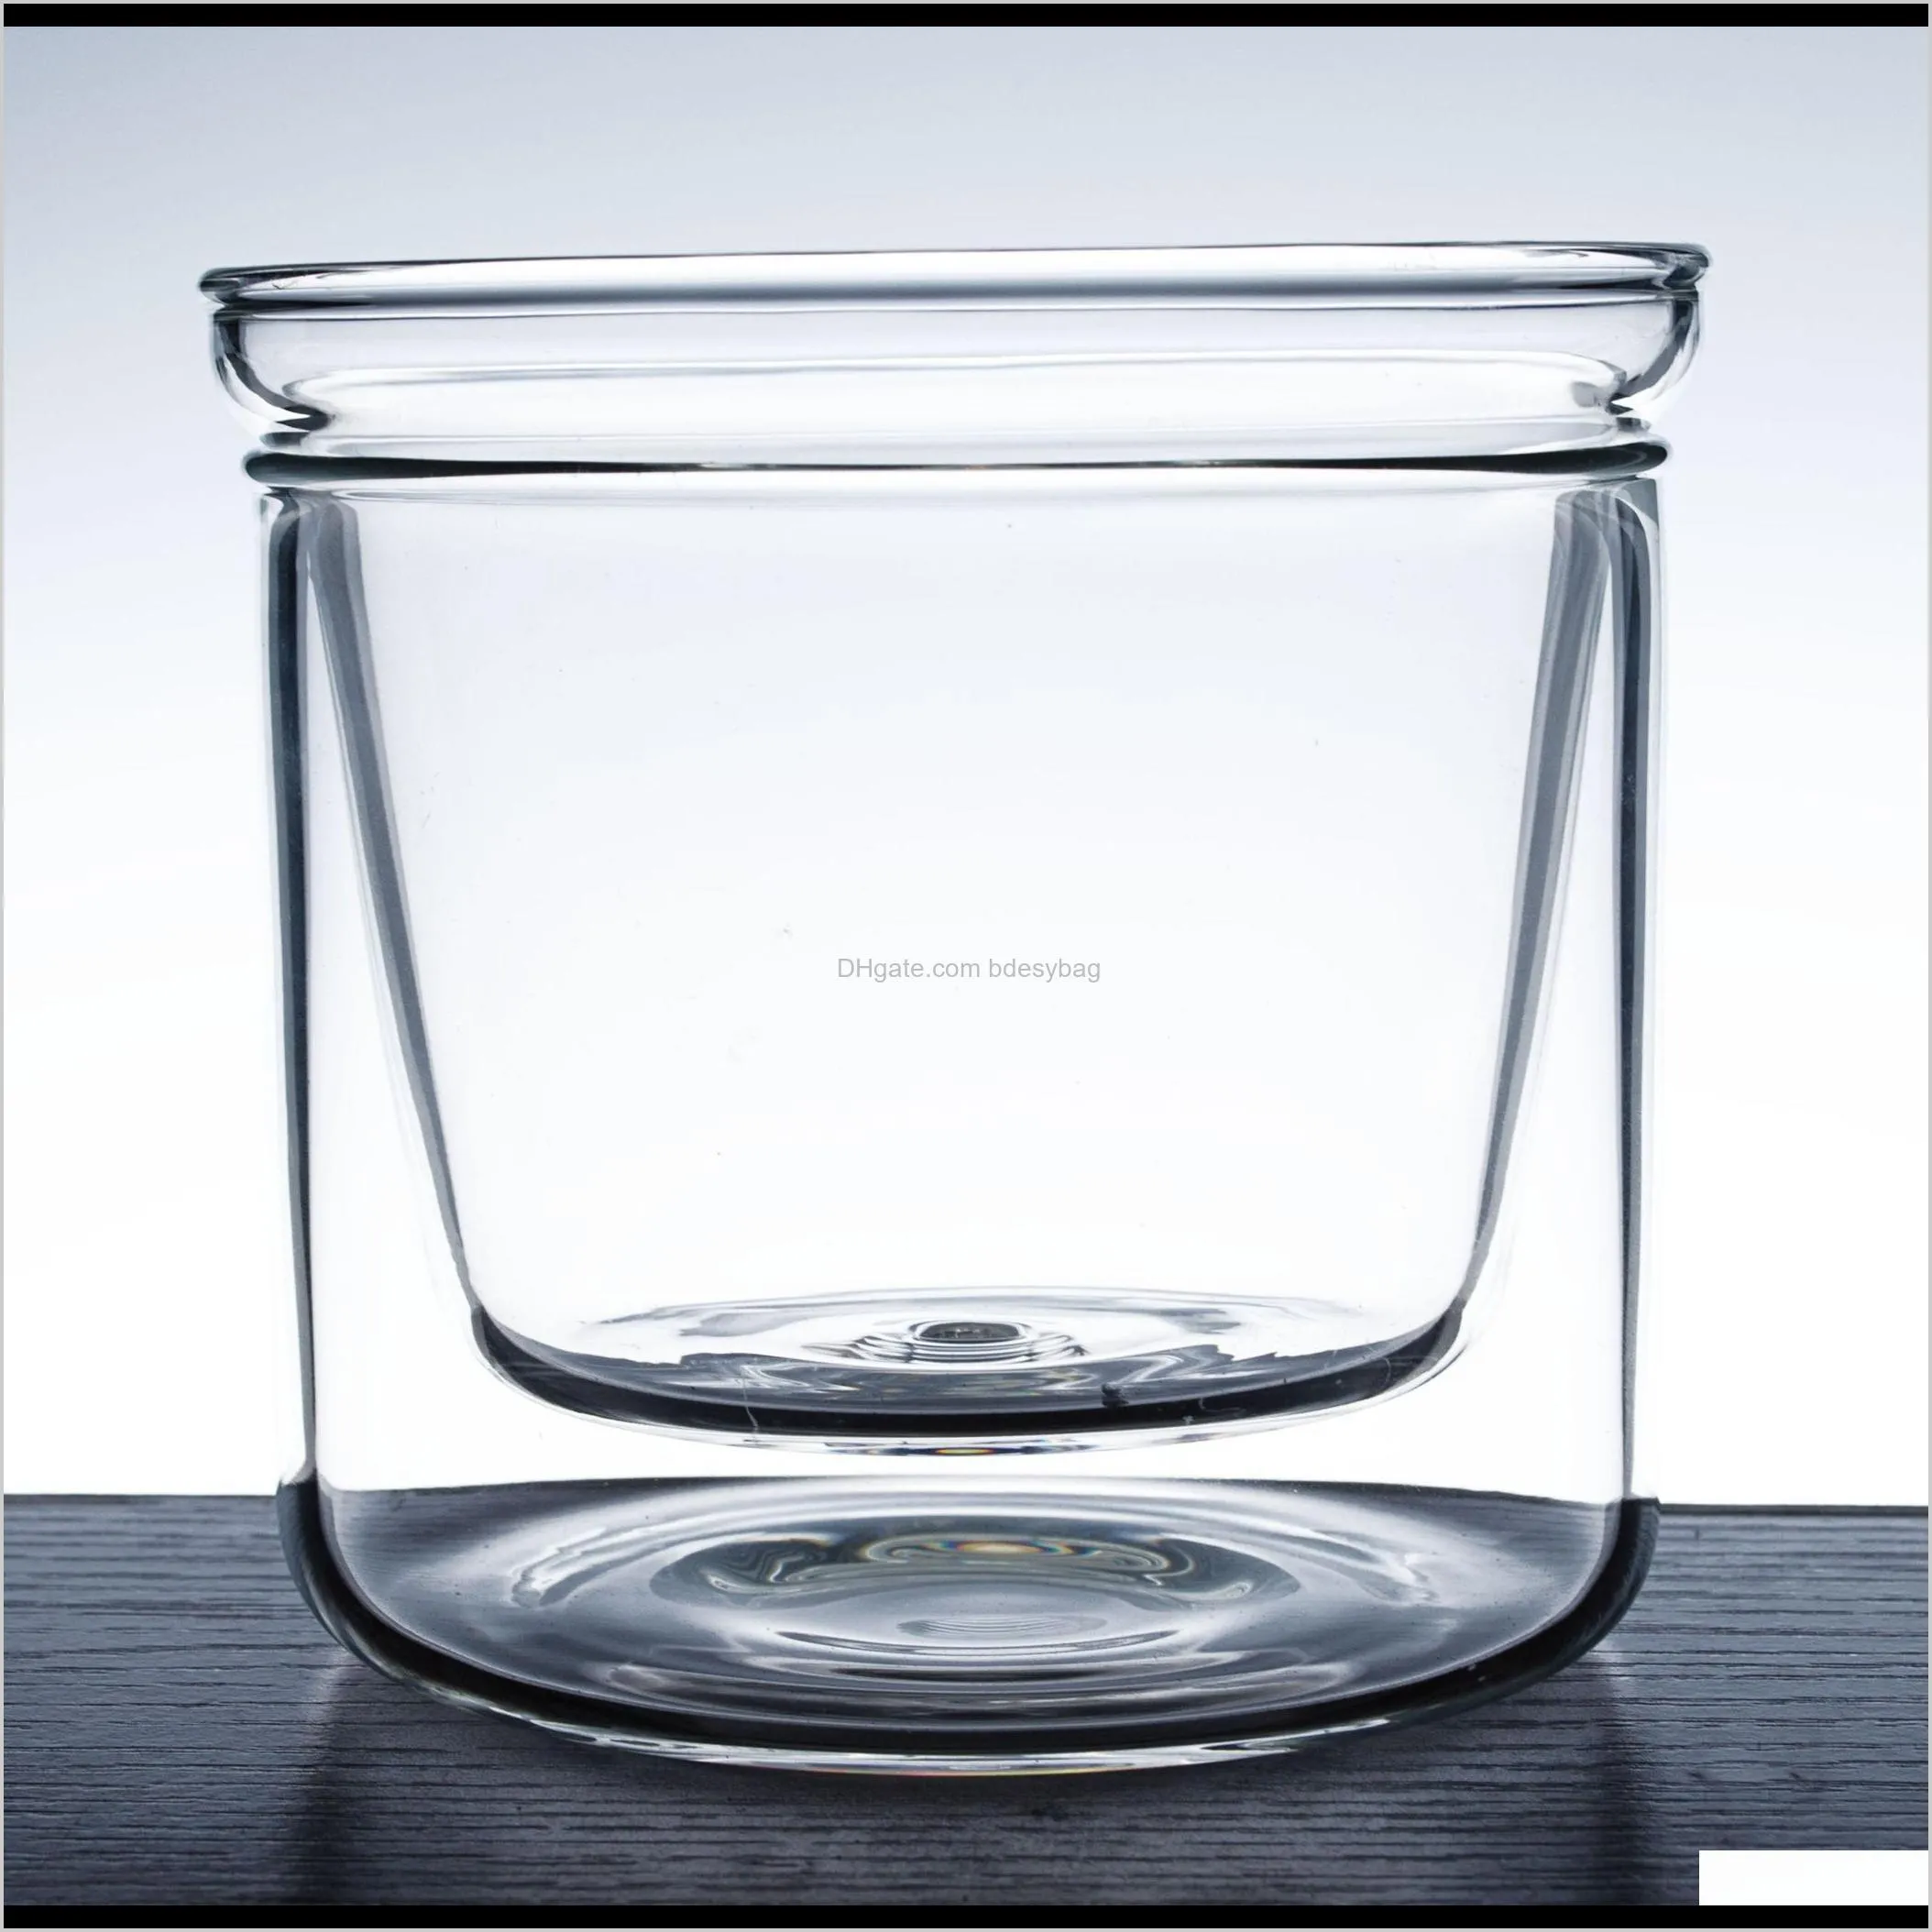 1x 400ml clear glass bowl garden planter vase flower pot with glass infuser home modern pot for green plant